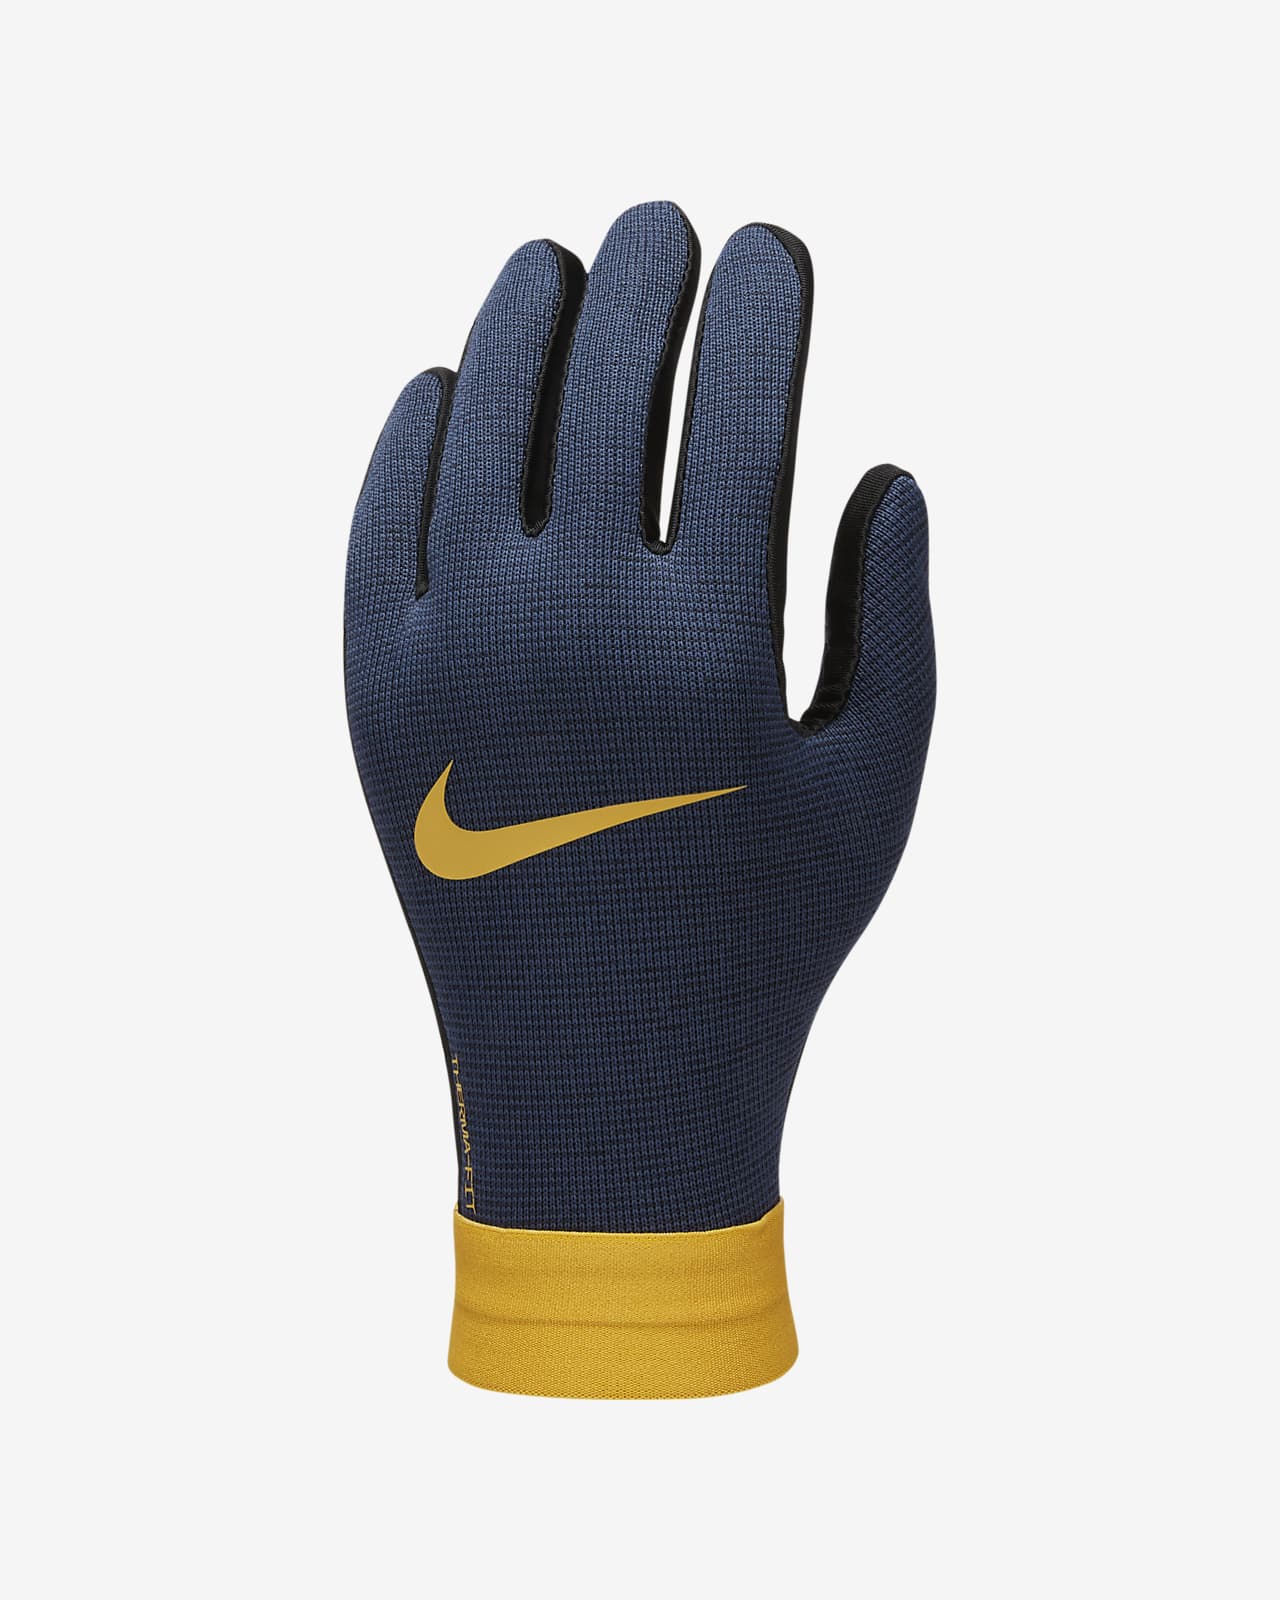 F.C. Barcelona Academy Kids' Nike Therma-FIT Football Gloves